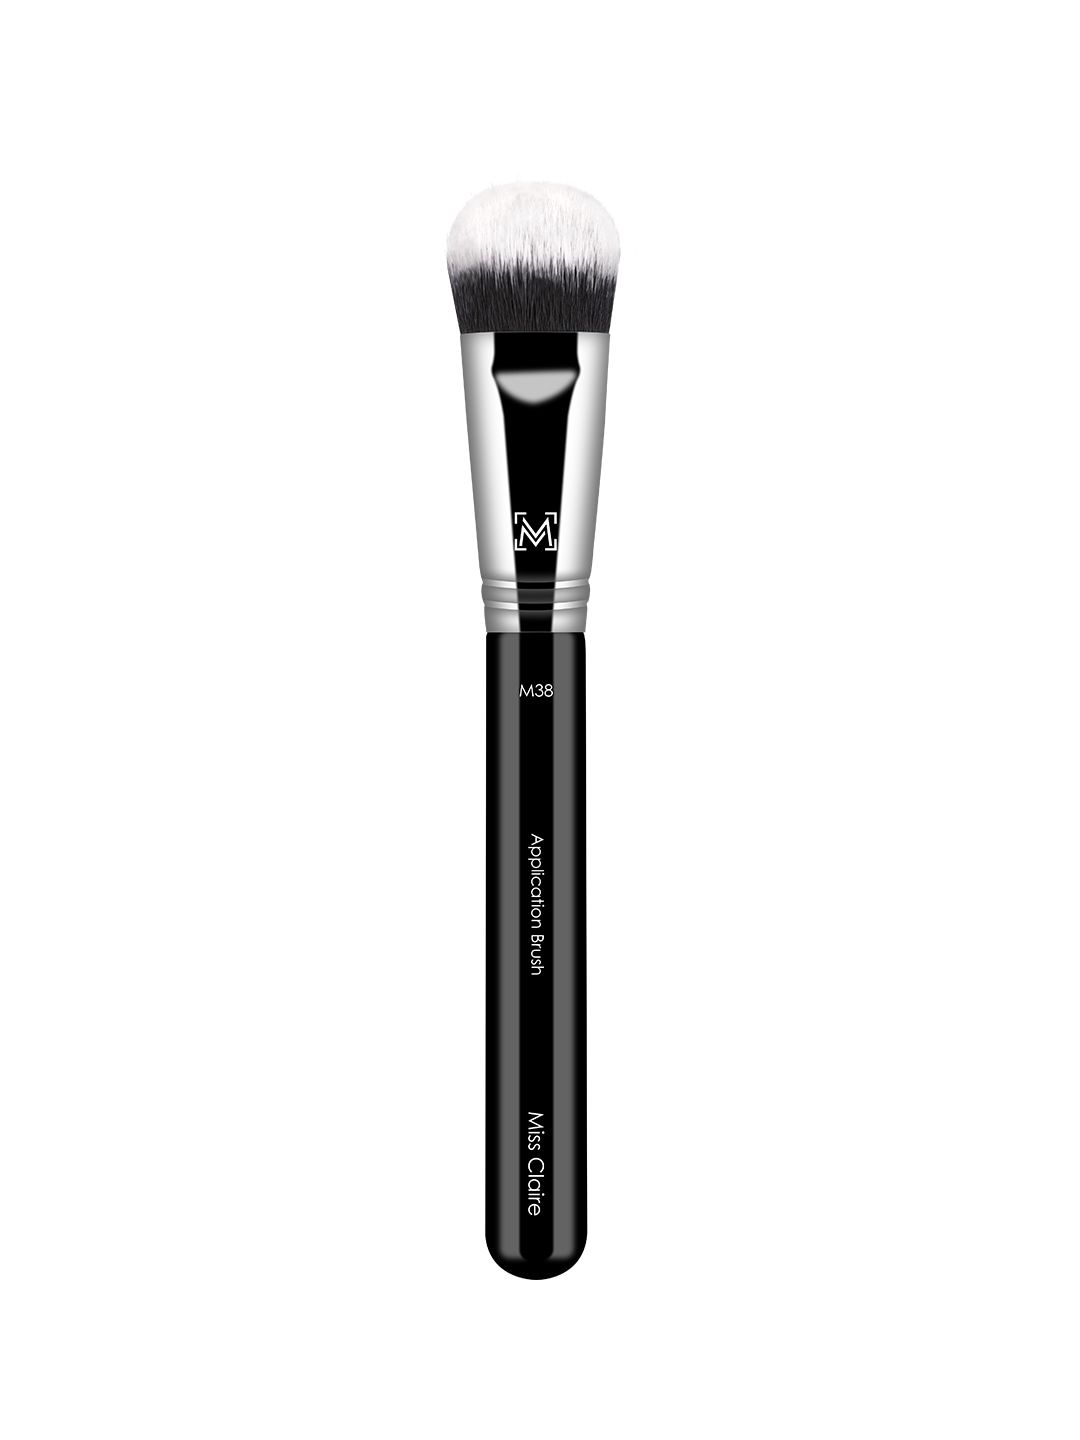 Miss Claire M38 - Application Brush for Face & Eyes - Silver-Toned & Black Price in India